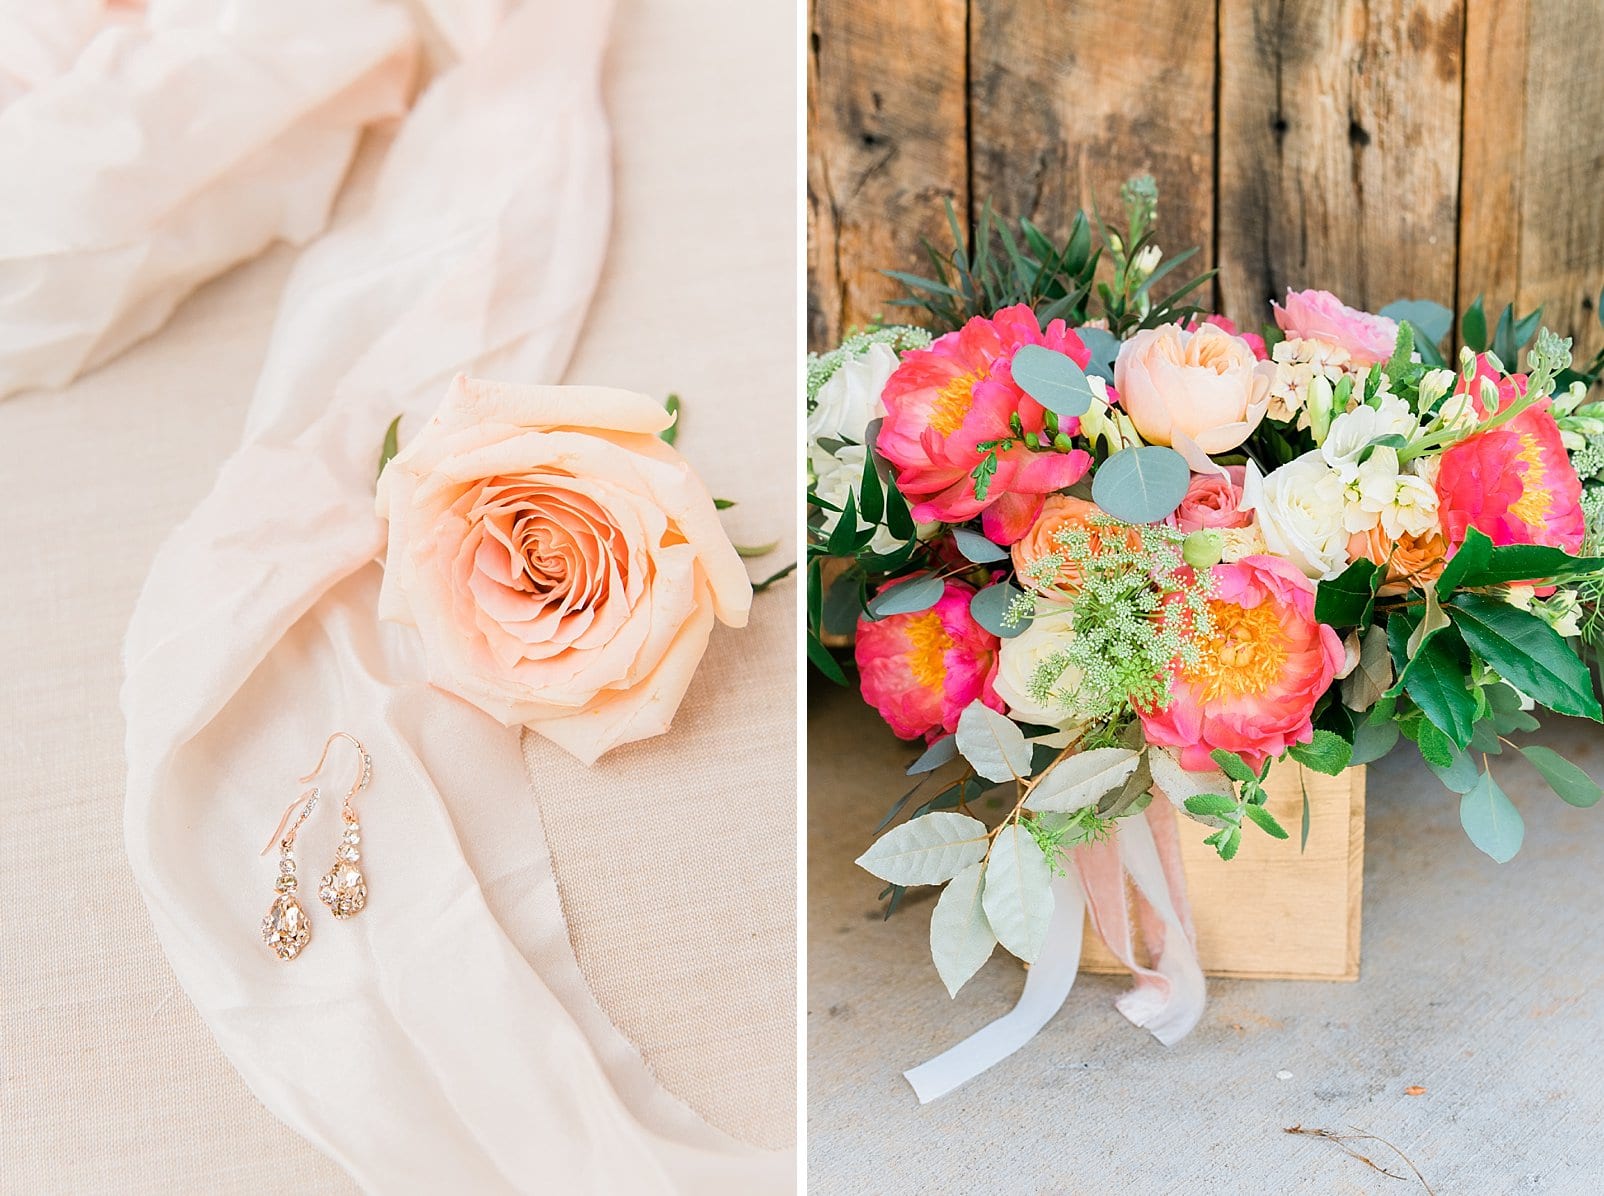 Wild Flora Farm bridal bouquet with bright coral and peach flowers and greenery photo